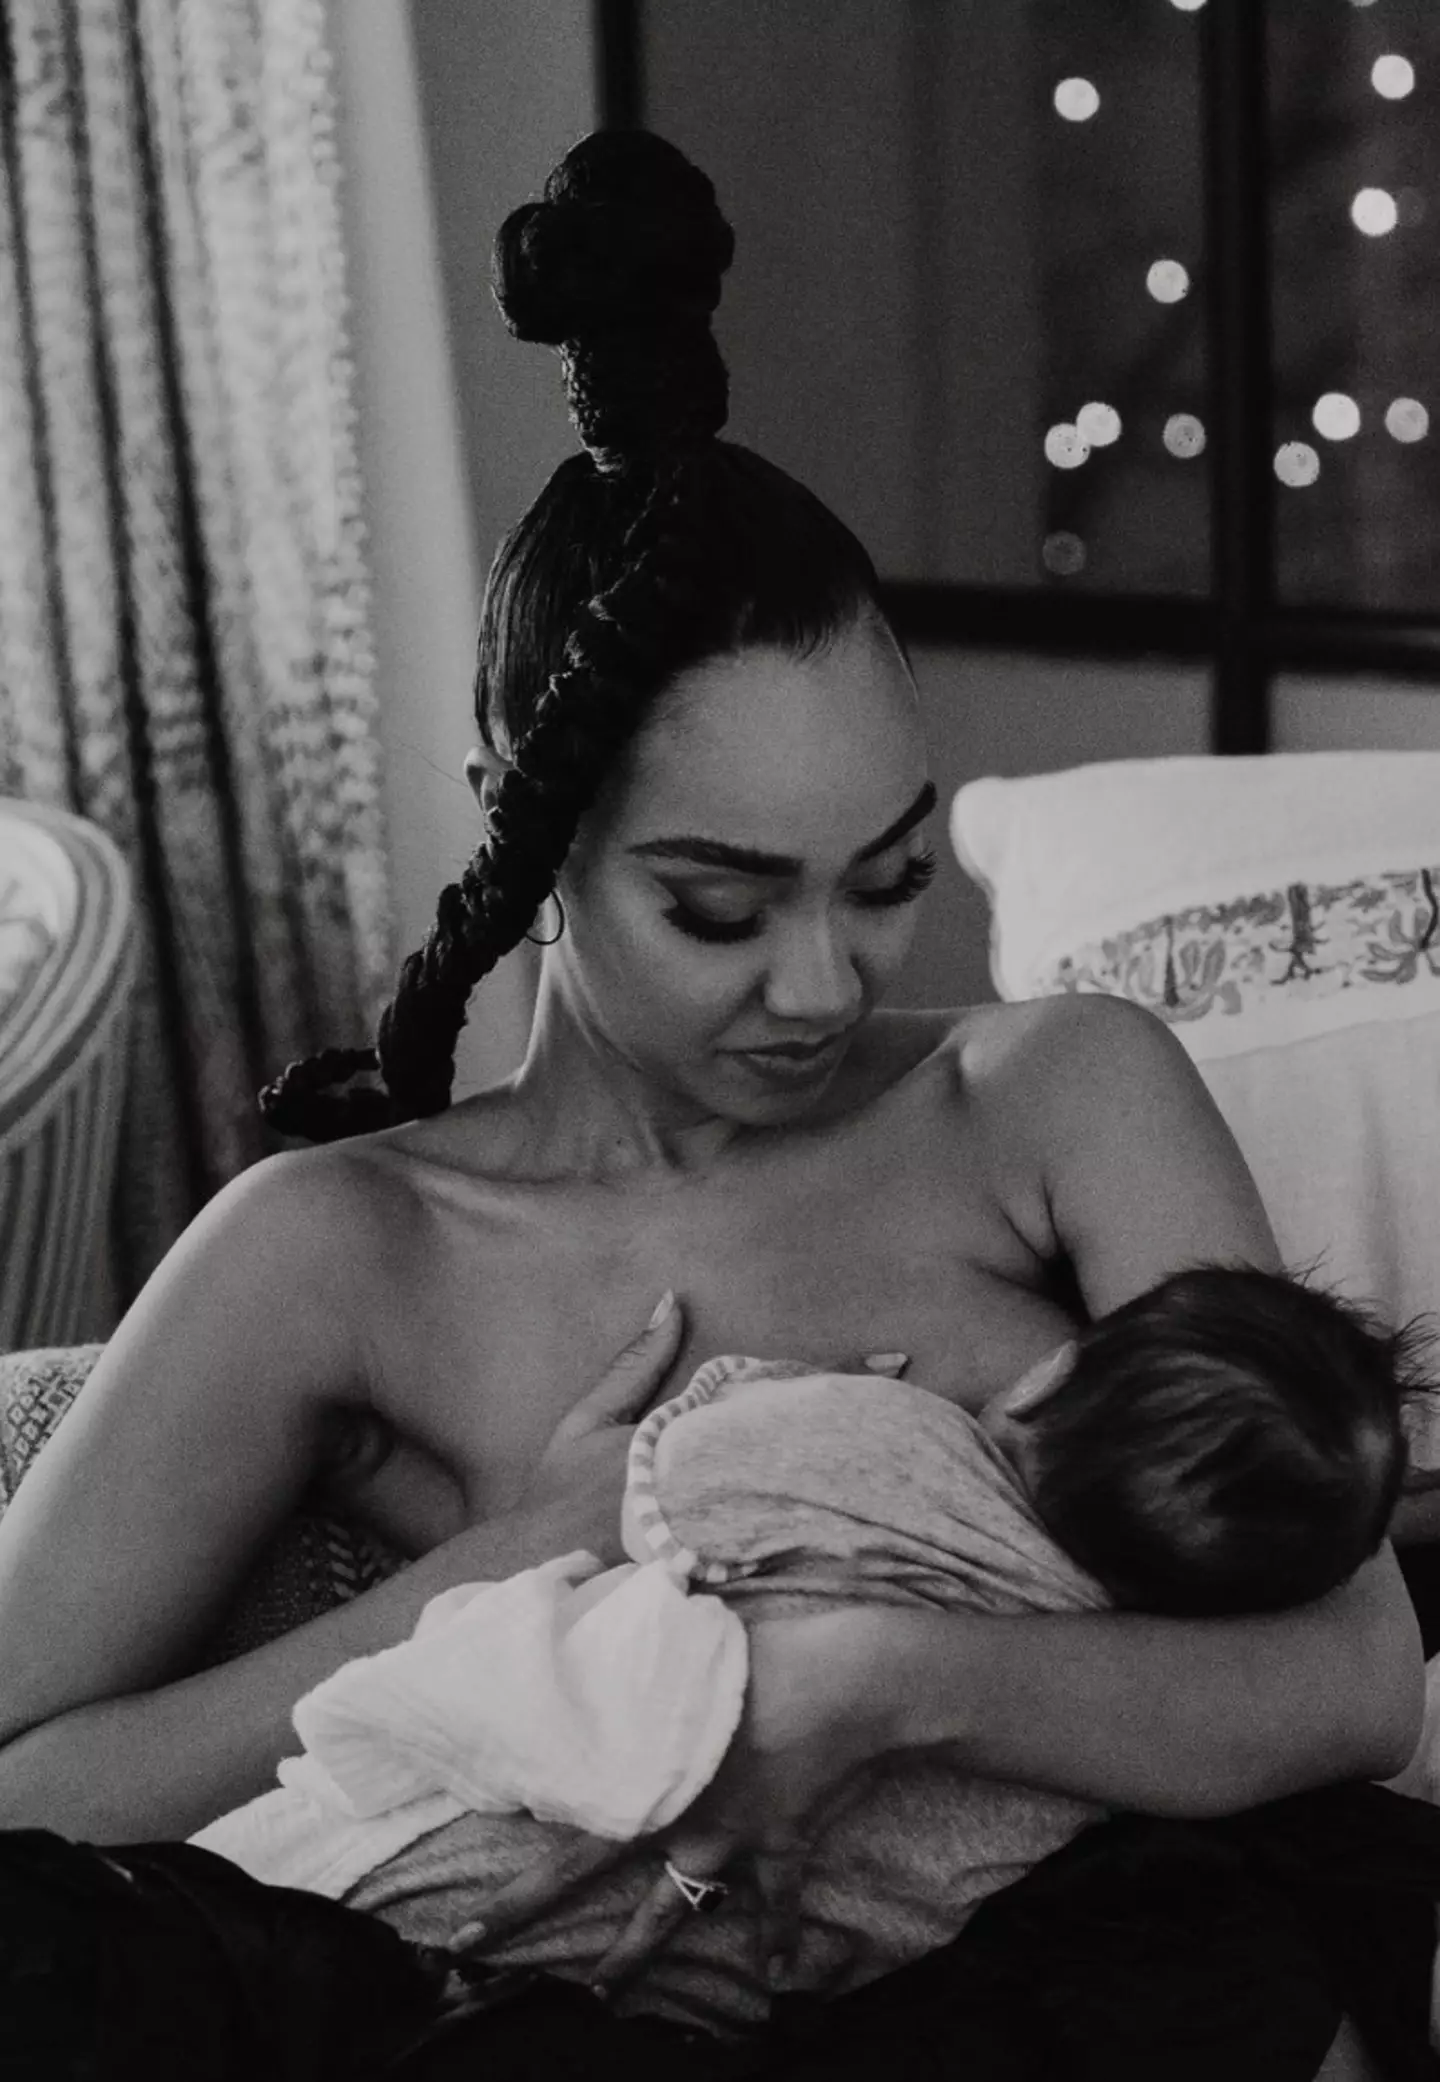 Leigh-Anne shared an intimate shot with her baby (